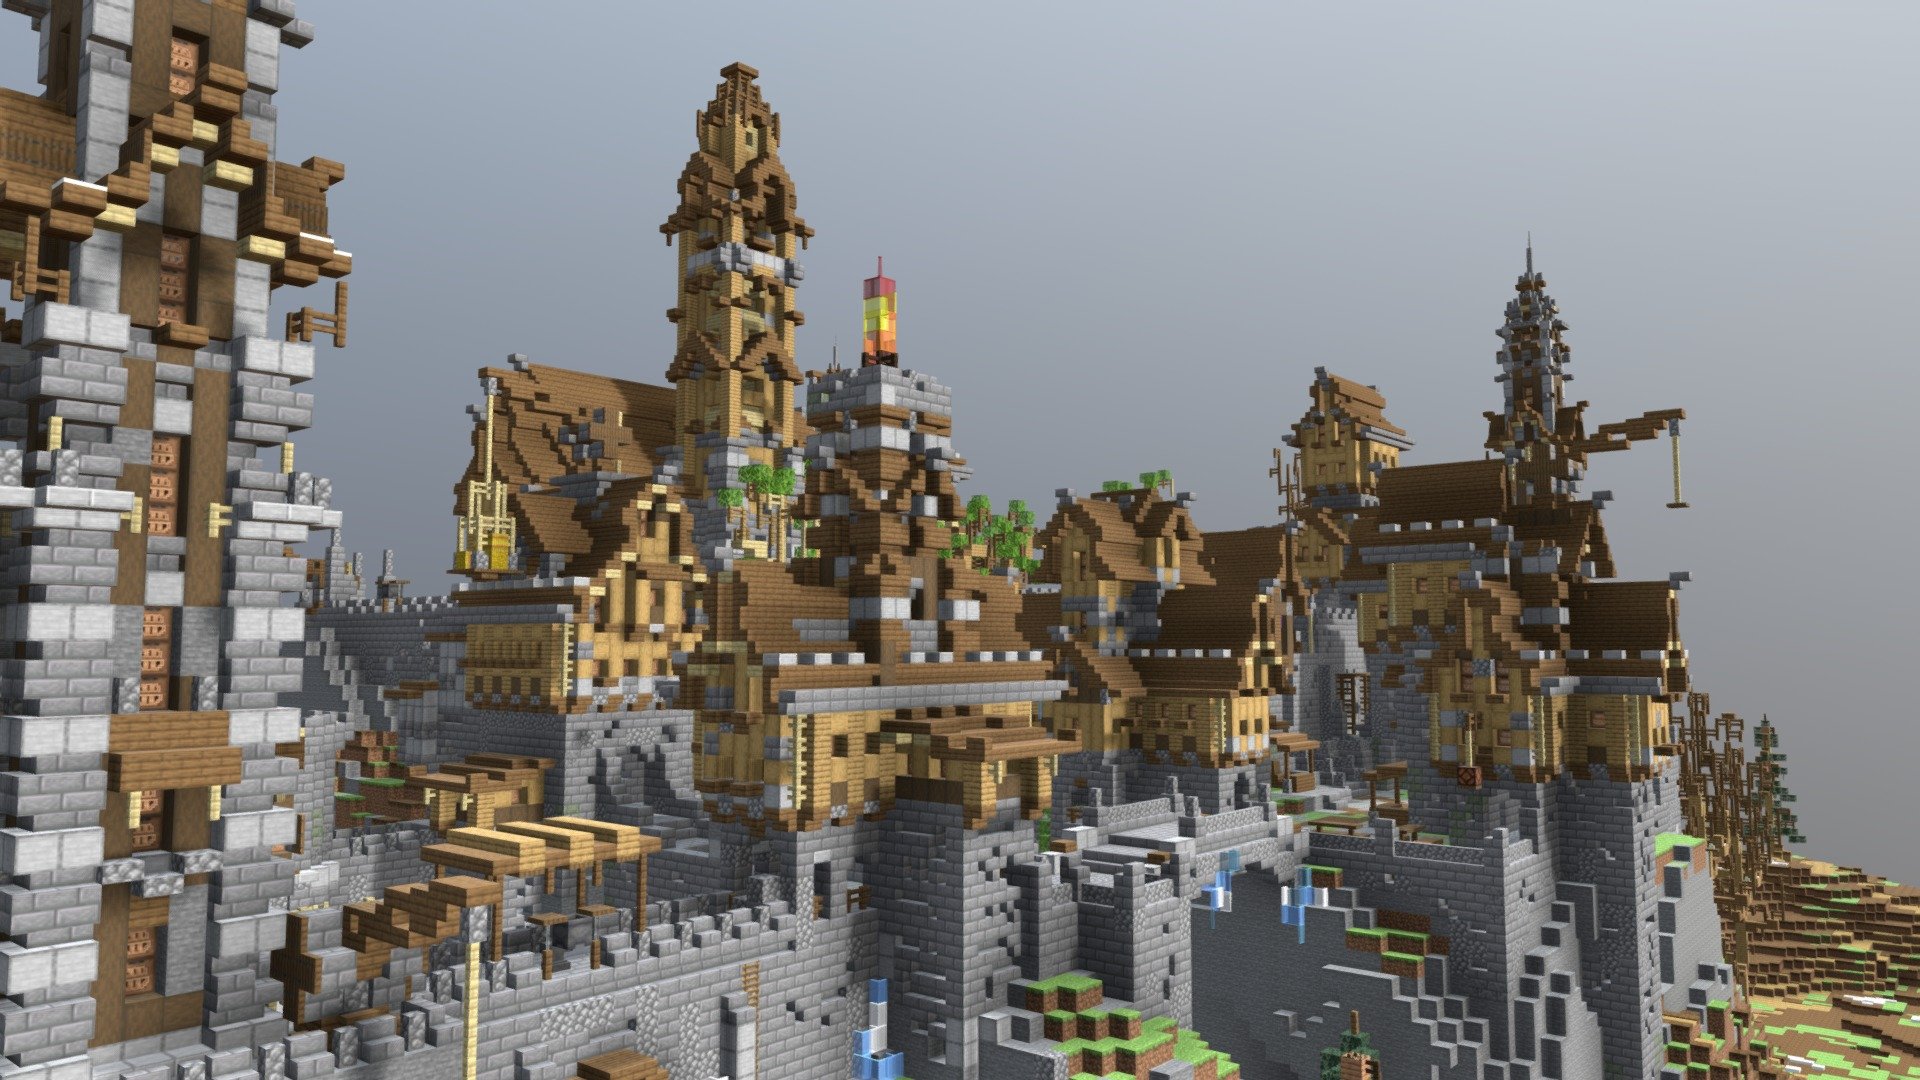 Castle (Minecraft Builld) - Download Free 3D model by P_4_N_D_A (@P_4_N_D_A) [9895f1f] - Sketchfab